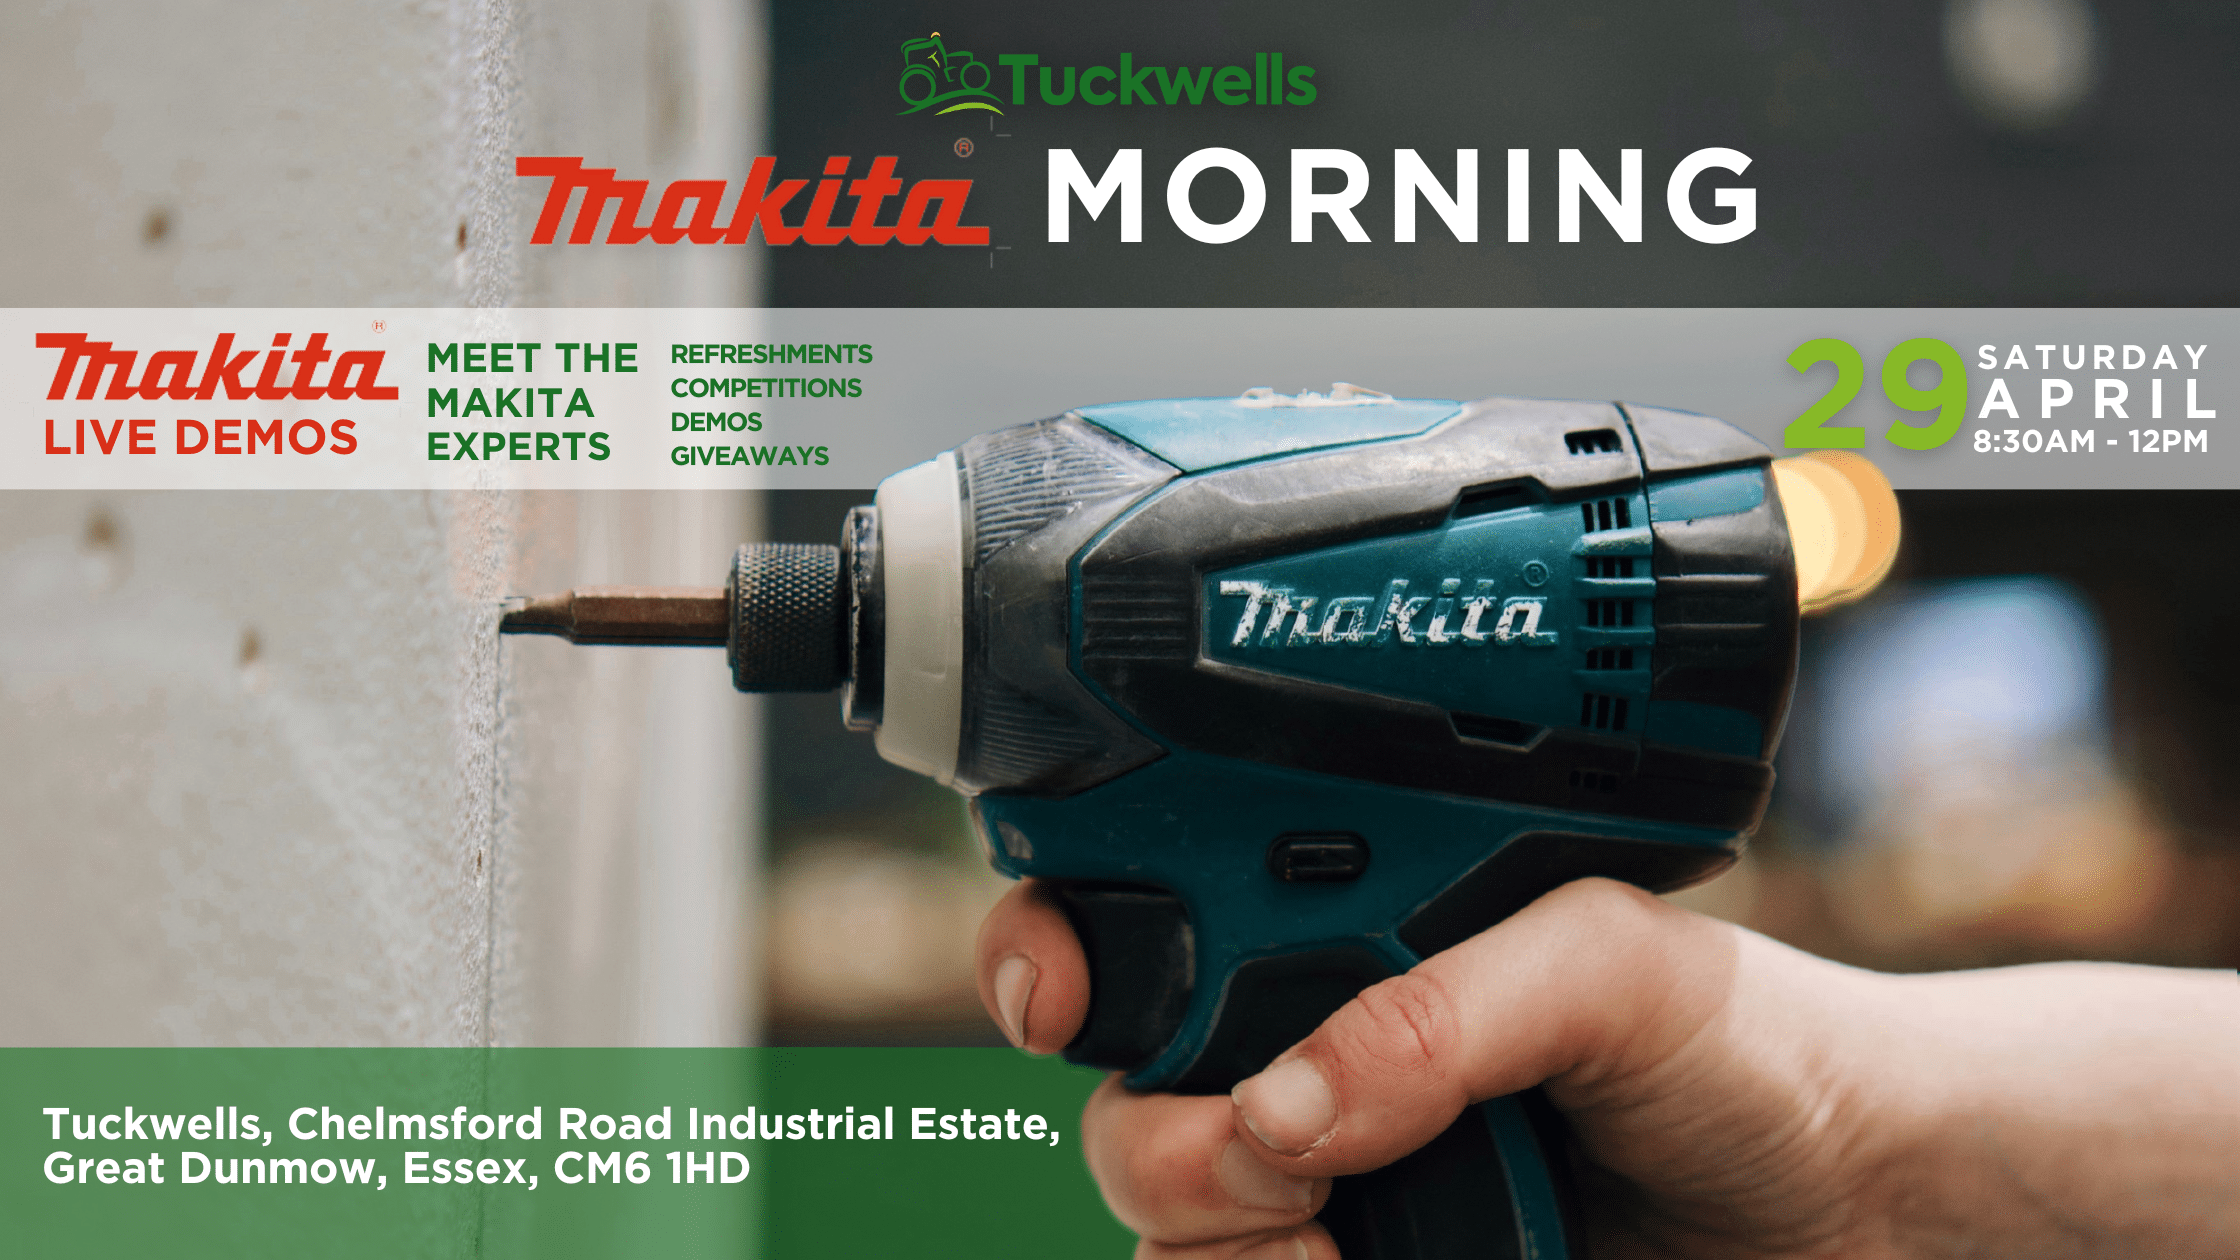 Join us for our Makita Morning